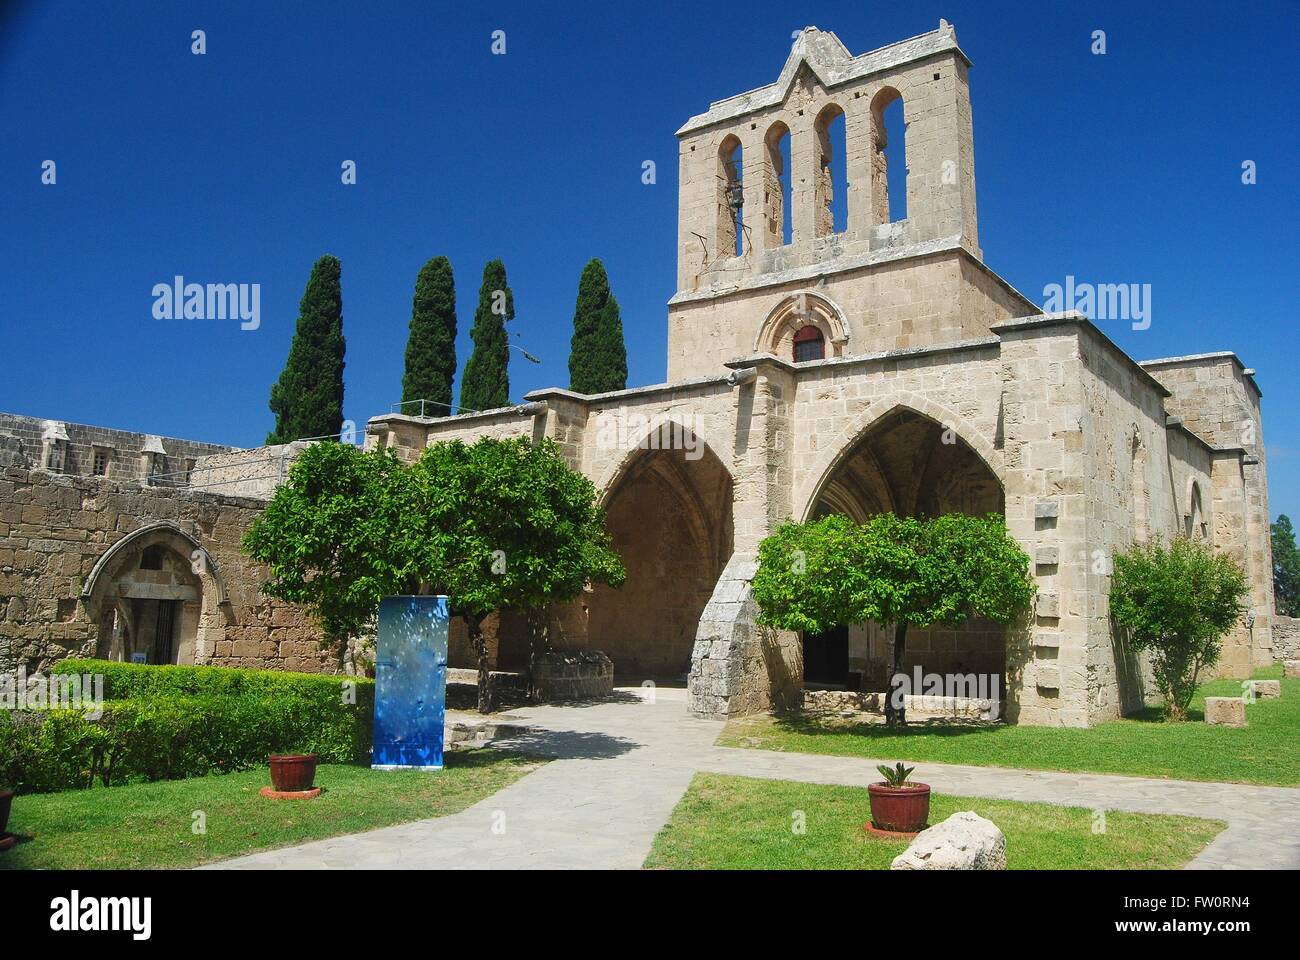 The lovely Augustinian monastery in Bellapais, Cyprus. Stock Photo